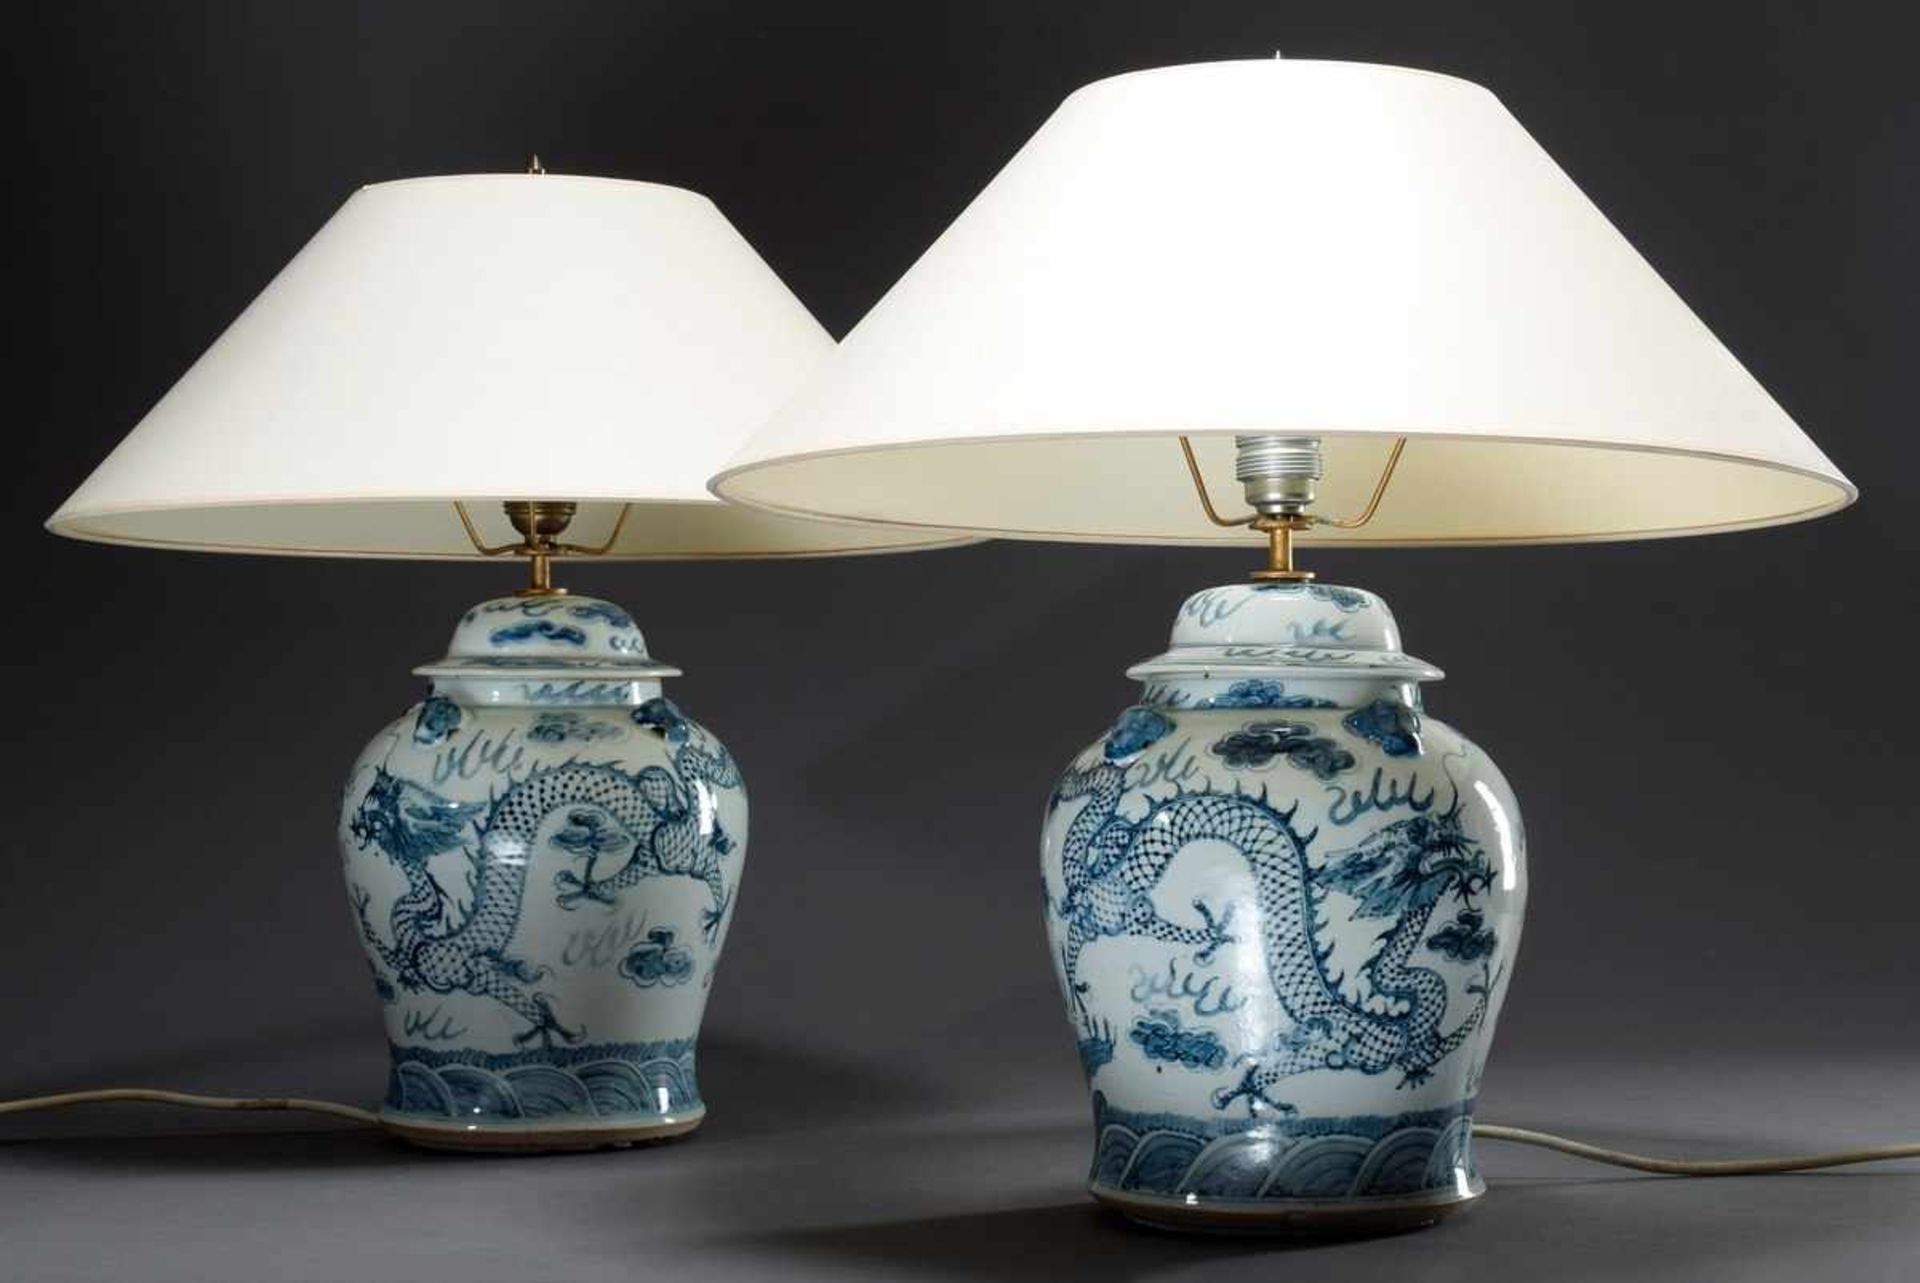 Pair of Chinese porcelain lamps with blue painting decoration "Cloud dragon with ball", h. 52cm,